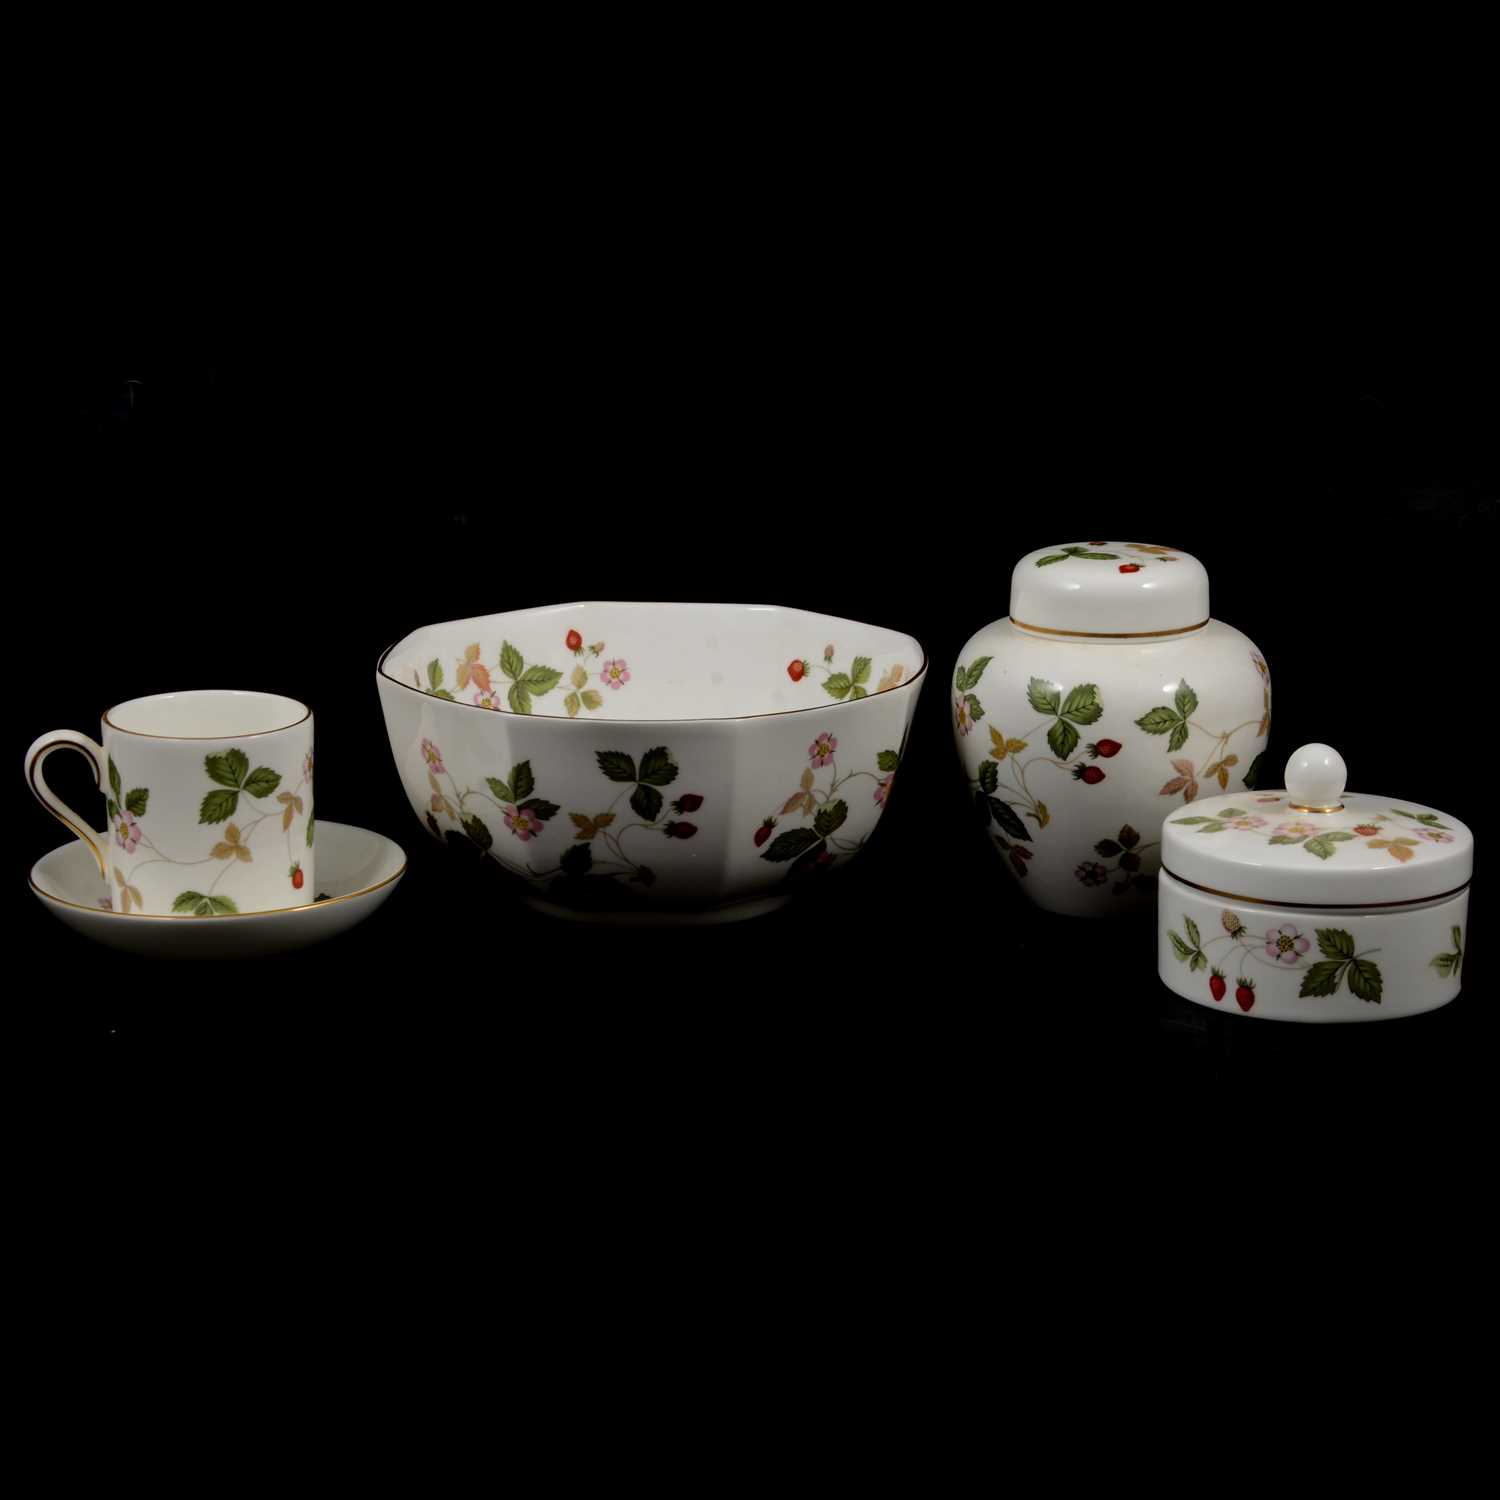 Lot 100 - One box of Wedgwood Wild Strawberry pattern wares.